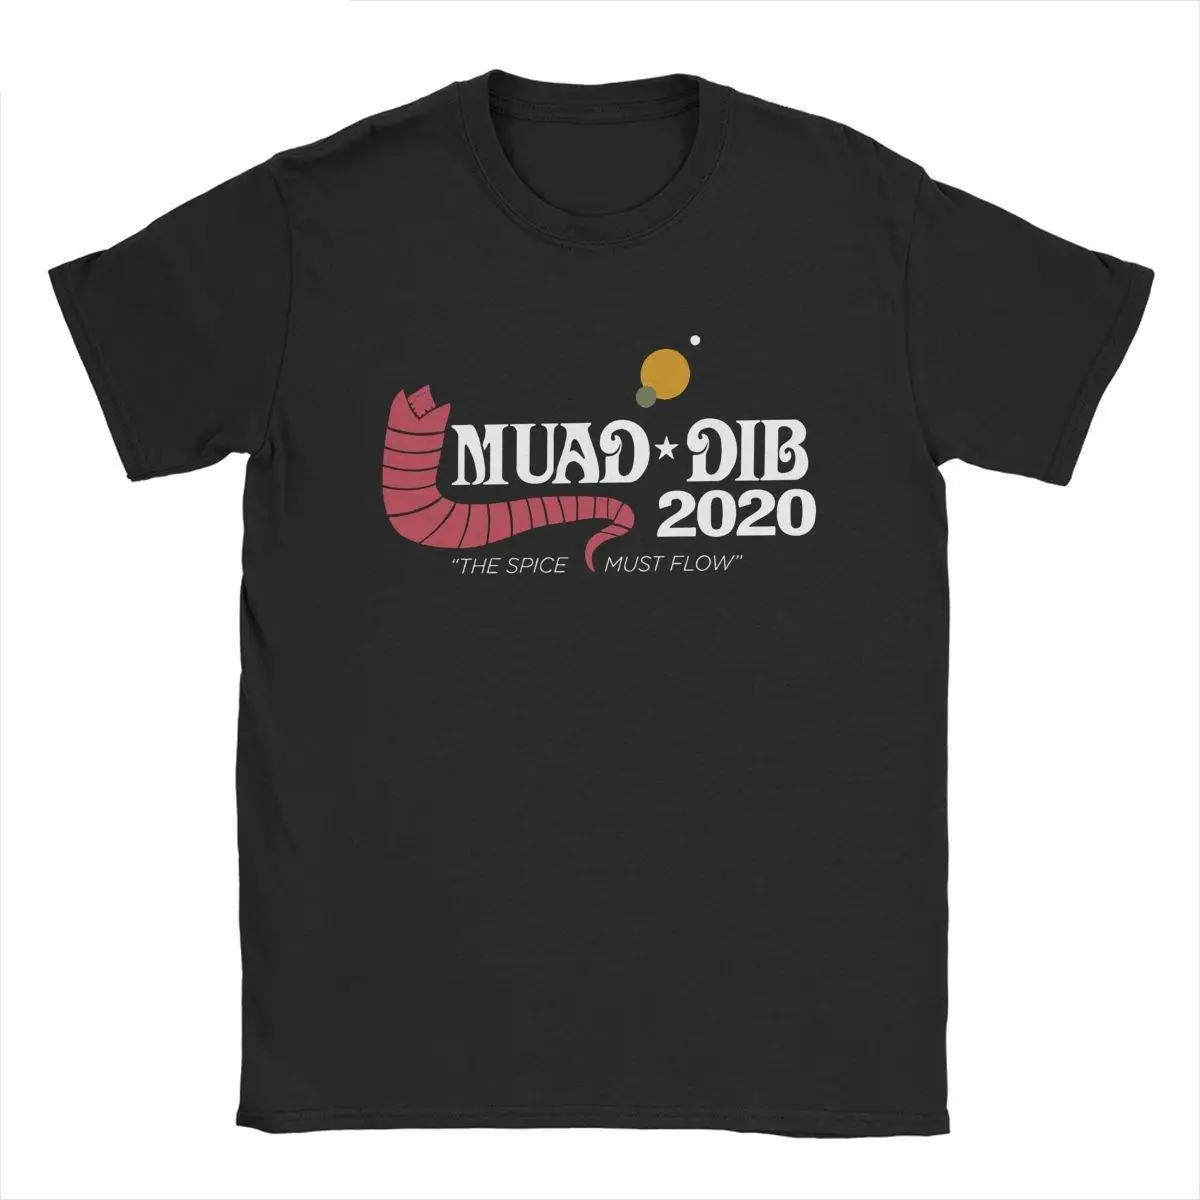 Dune Muad'Dib 2020 T Shirt for Men Pure Cotton Fashion T-Shirt O Neck Scifi Movie Tees Short Sleeve Tops Adult